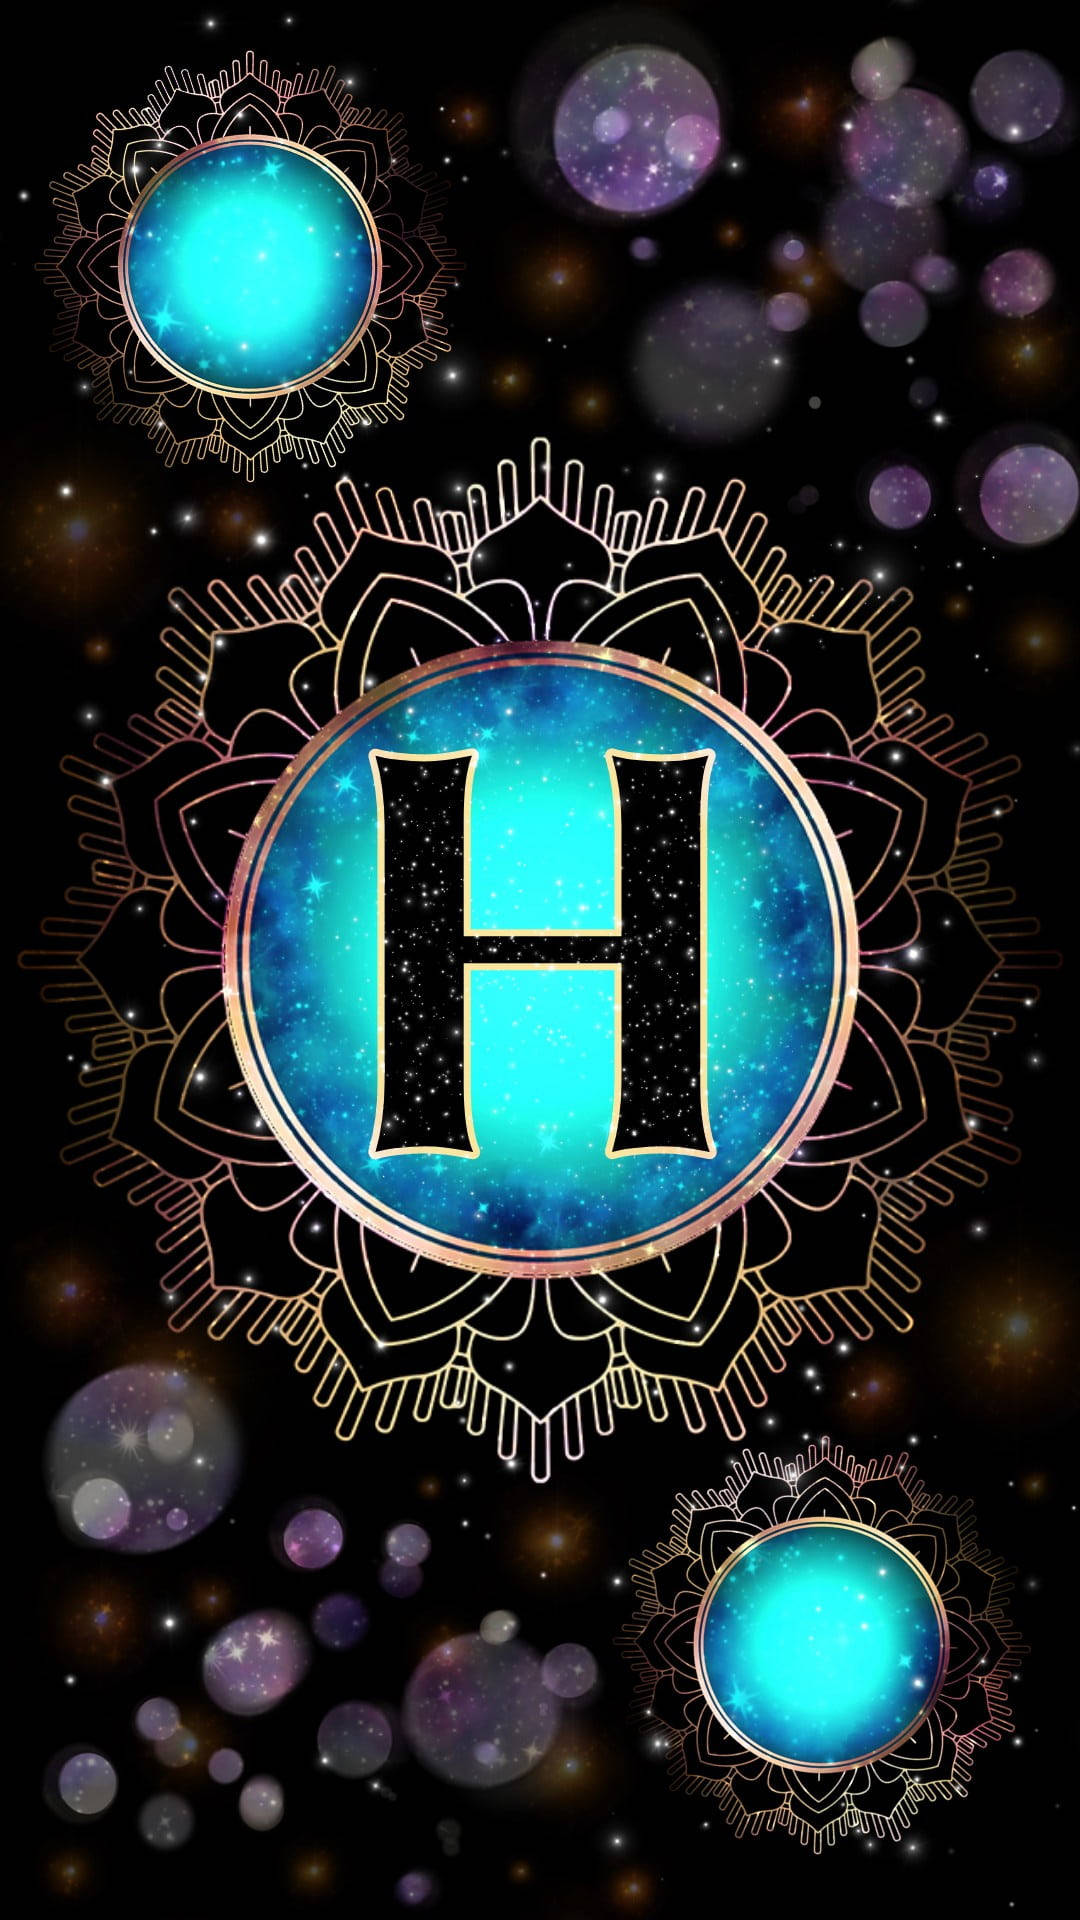 Free Letter H Wallpaper Downloads, [100+] Letter H Wallpapers for FREE |  